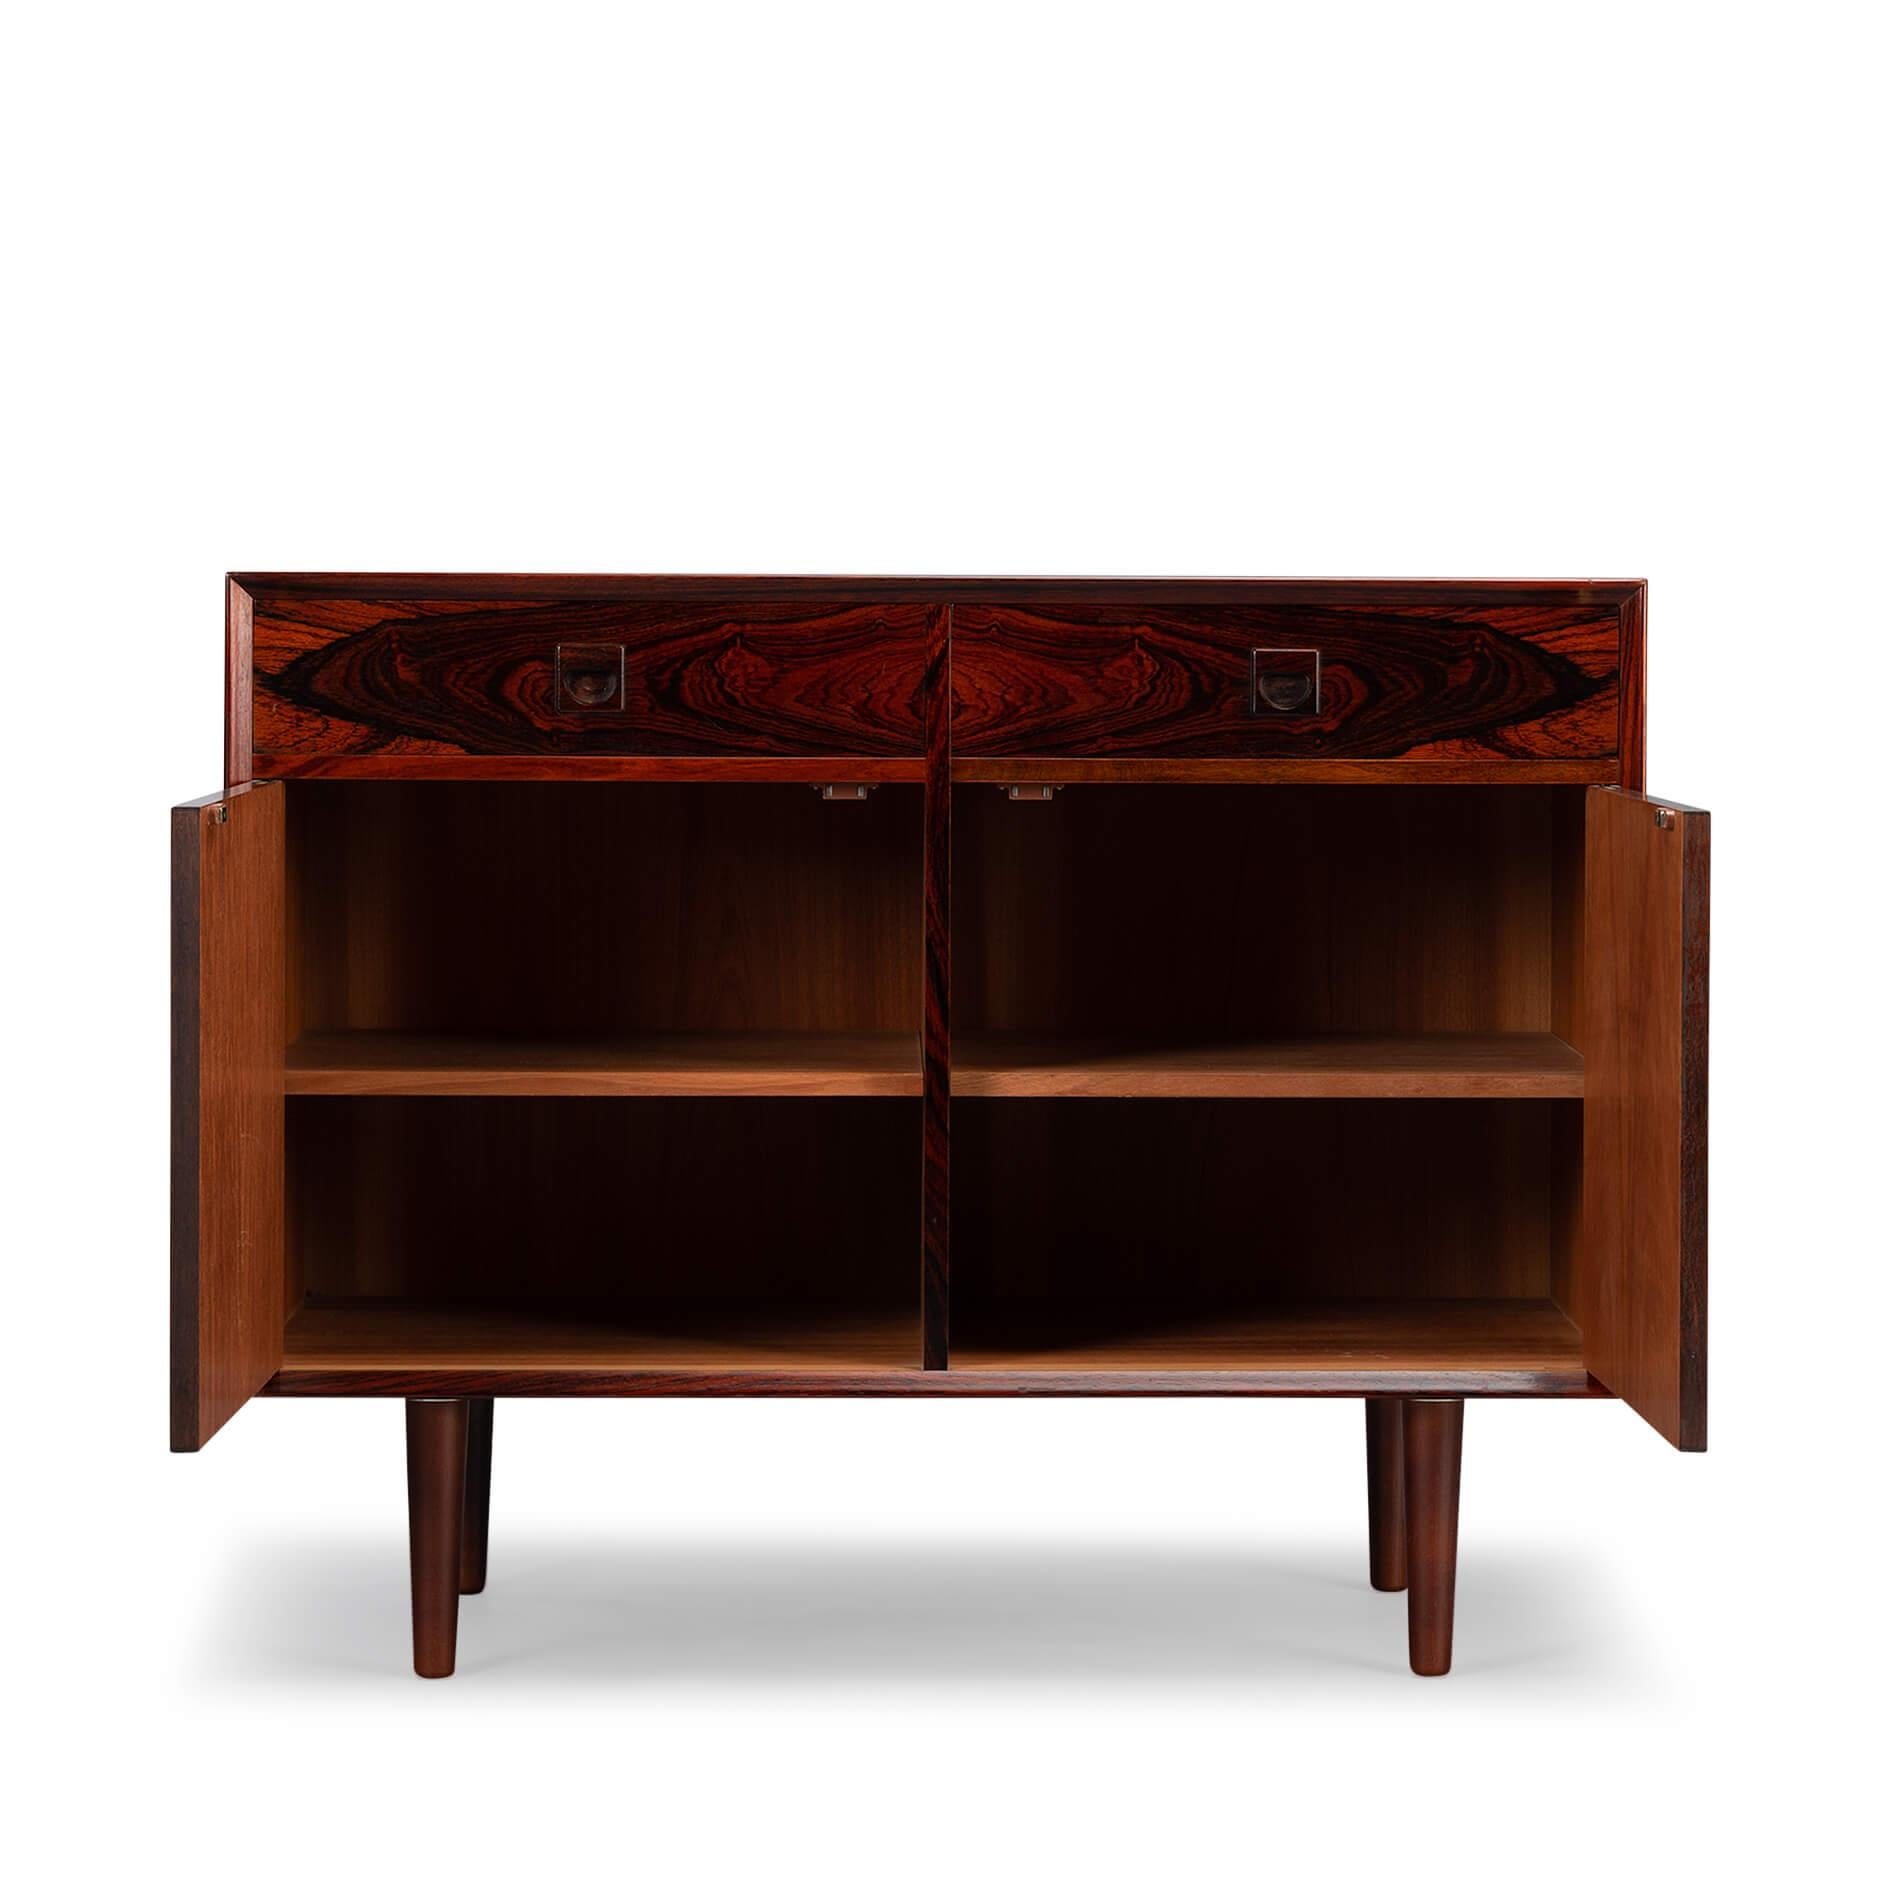 Small rosewood sideboard designed by E. Brouer and manufactured by Brouer Møbelfabrik. An eye-catcher in every hallway, study or living! This sideboard has a top layer of two drawers that fit like a glove. Underneath are two doors.

There is a